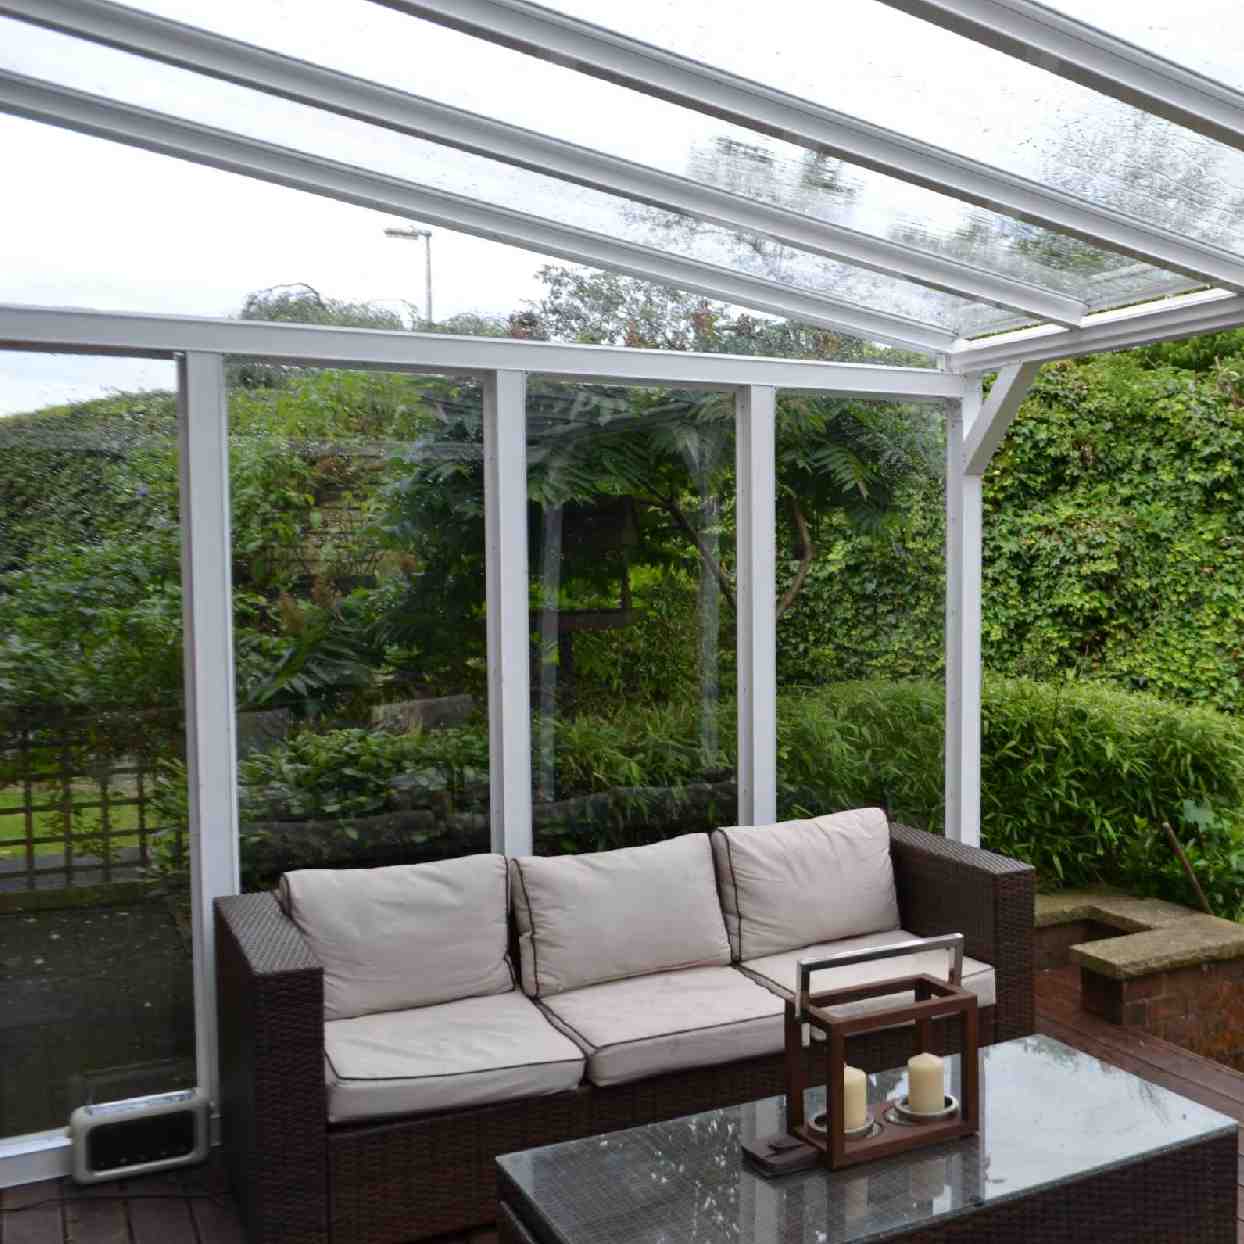 Buy Omega Verandah White with 16mm Polycarbonate Glazing - 11.6m (W) x 2.0m (P), (5) Supporting Posts online today